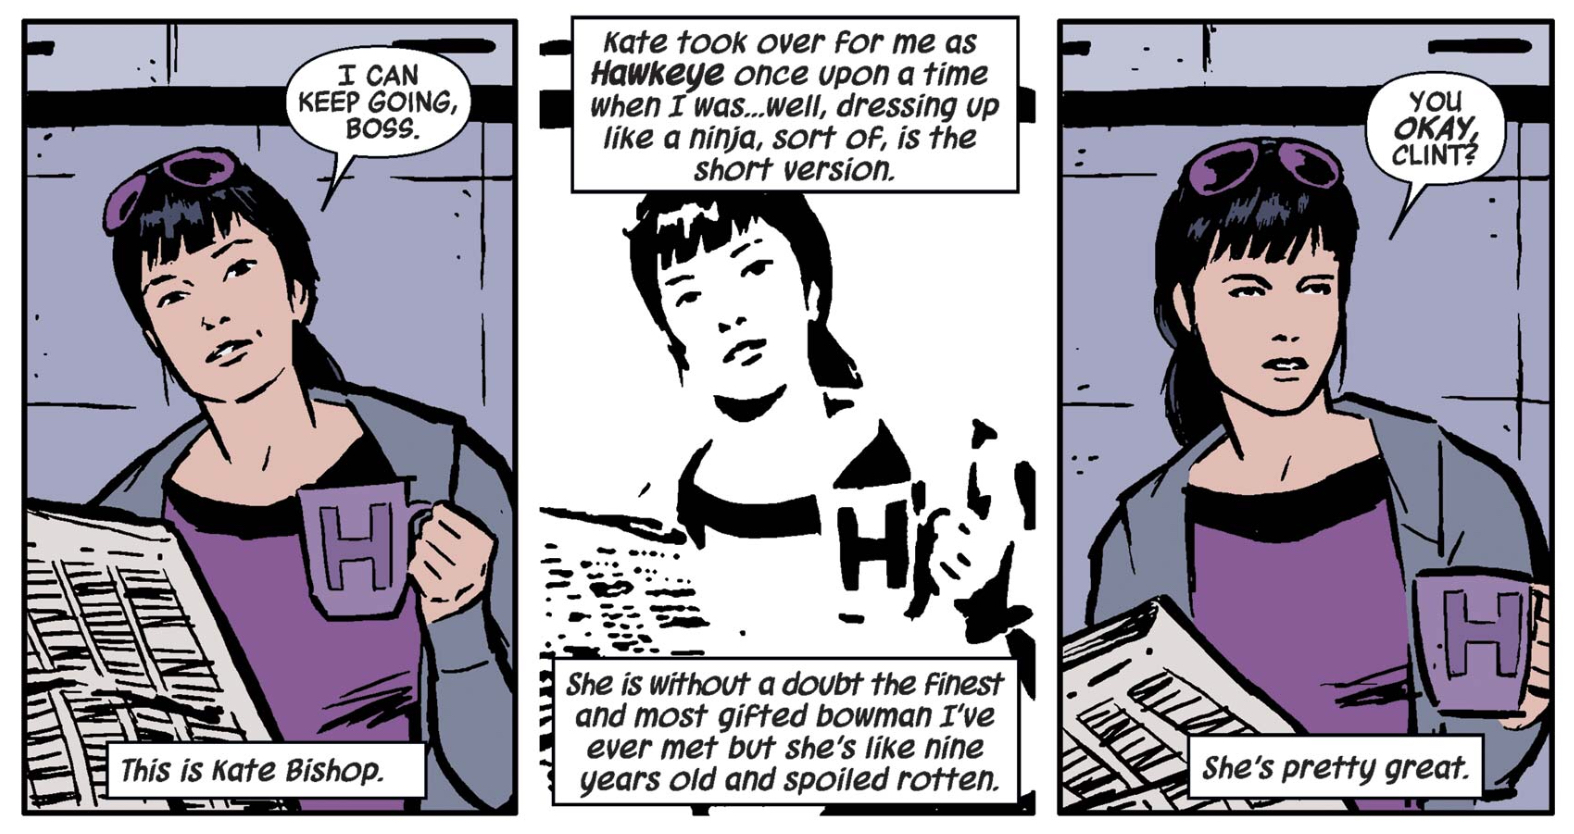 Kate Bishop holding a cup of coffee from Hawkeye #1, Marvel Comics (2012).